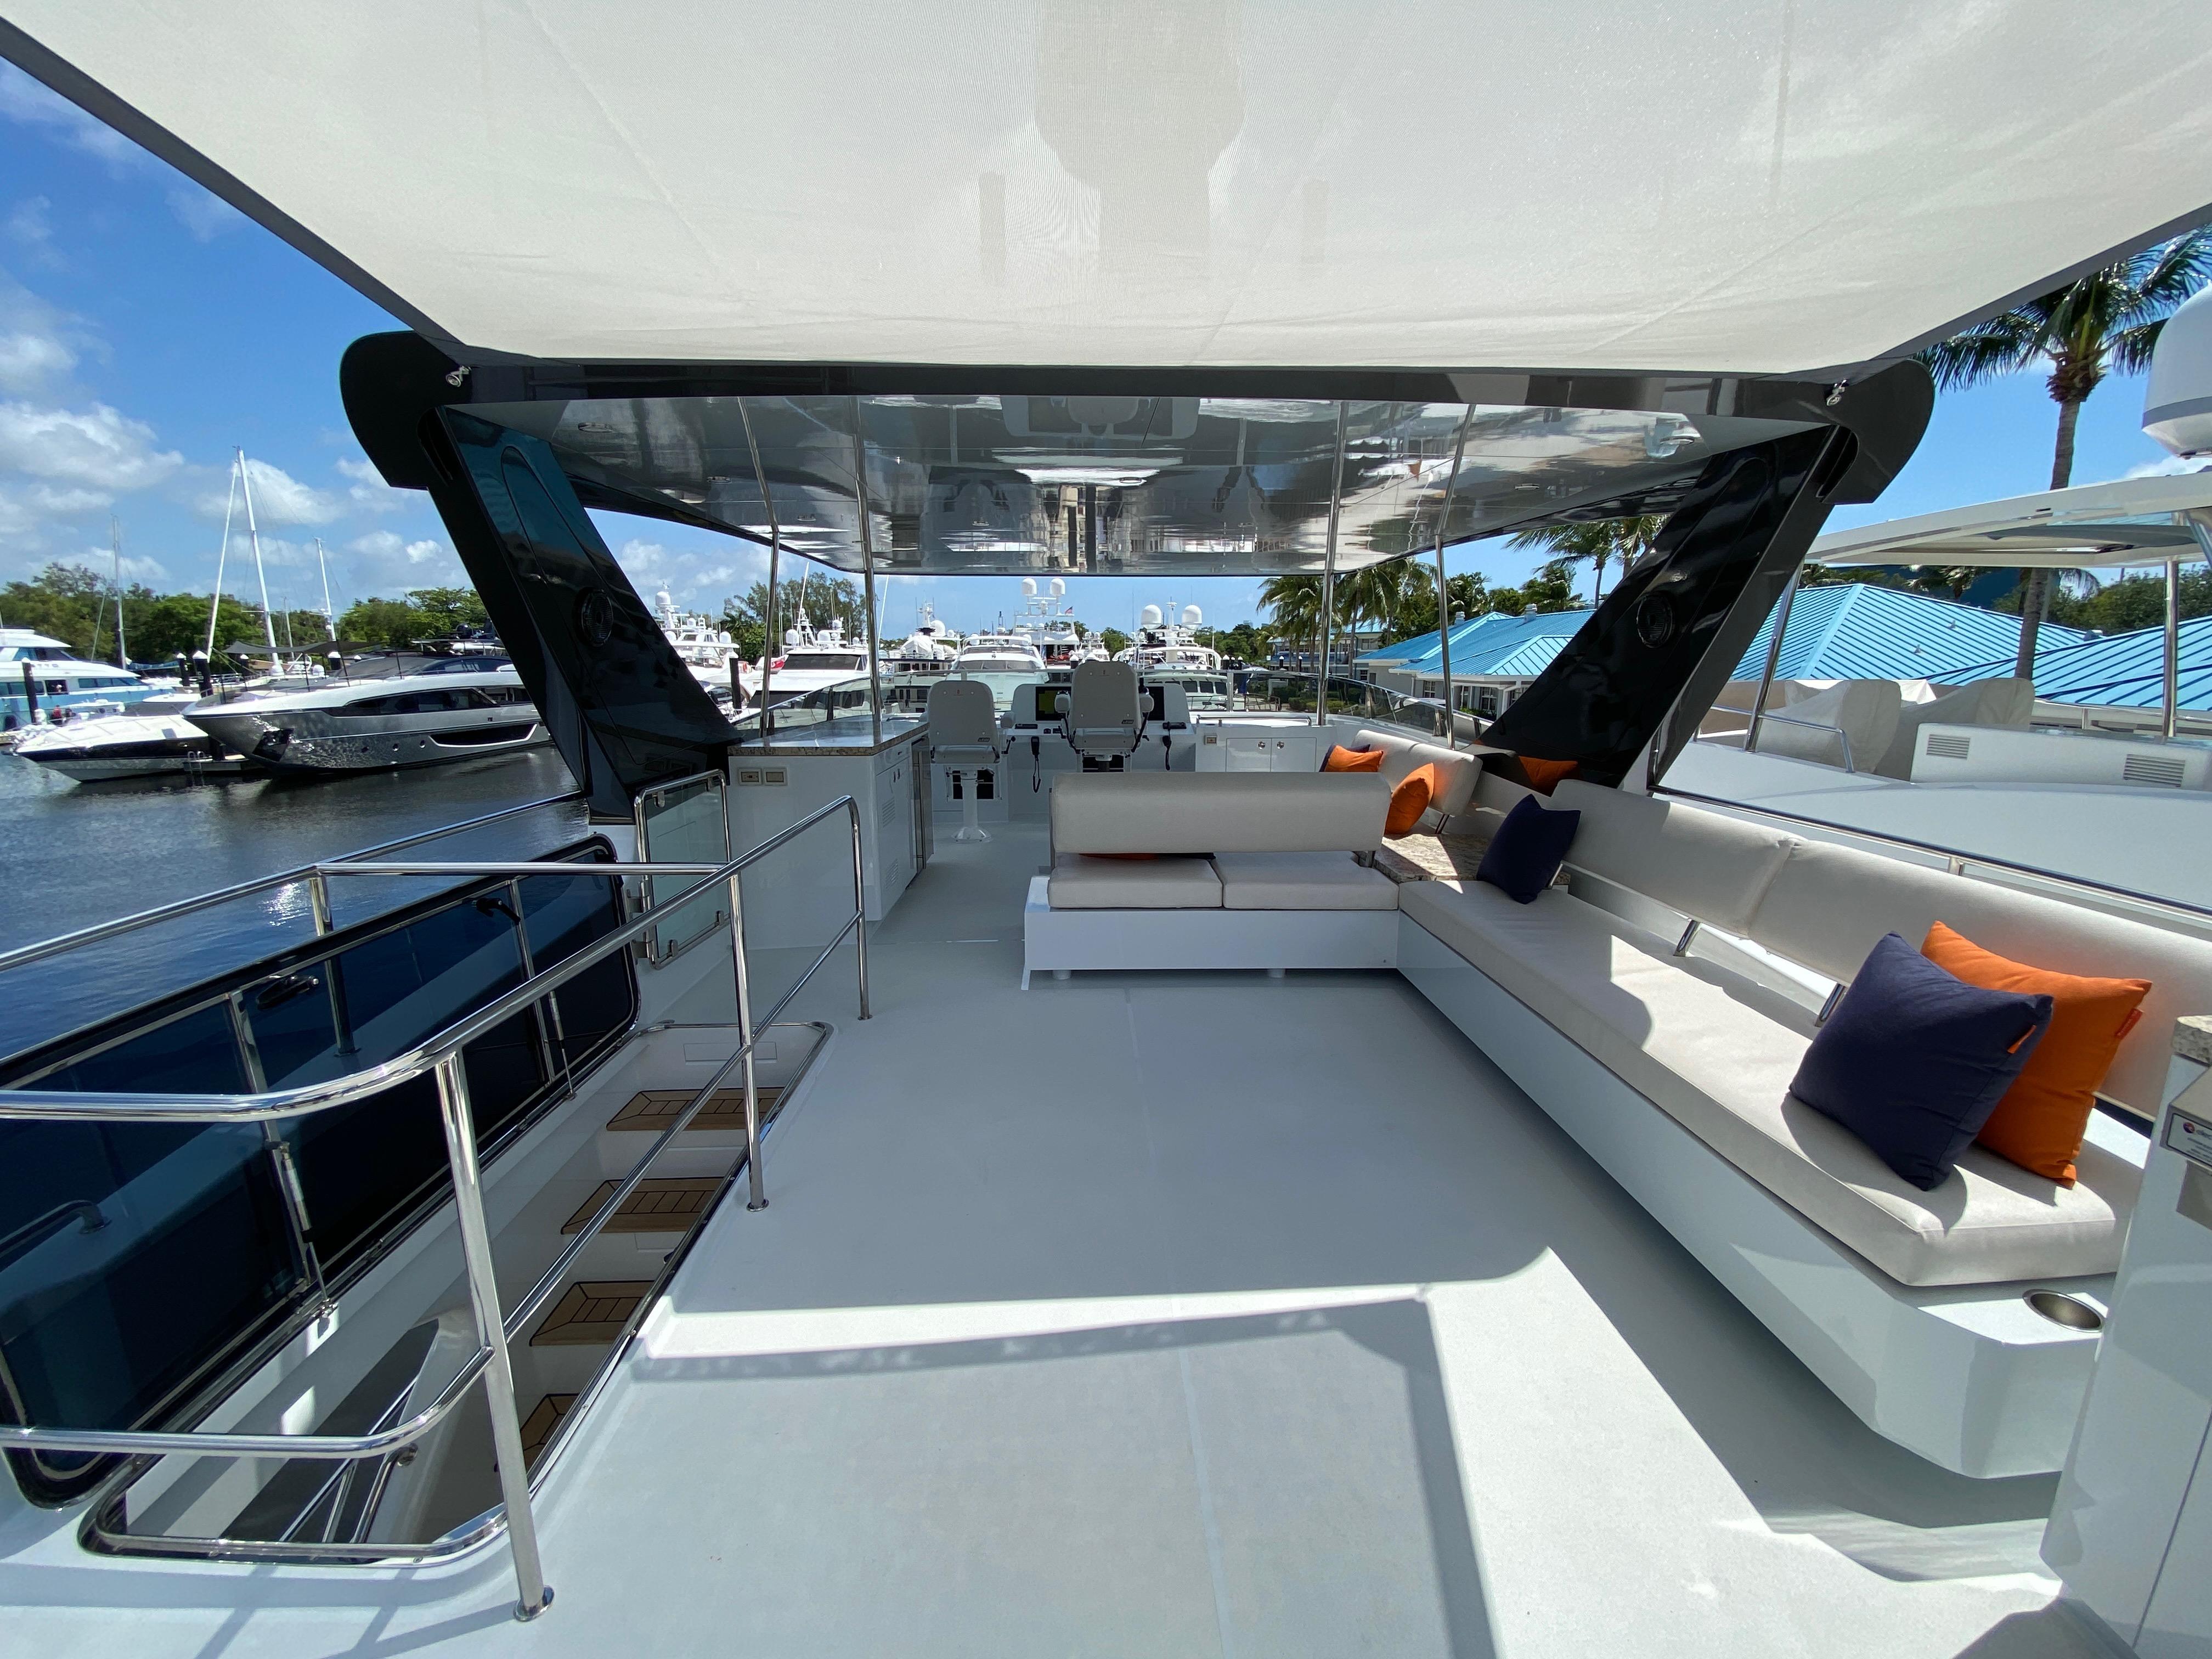 clb 72 yacht price